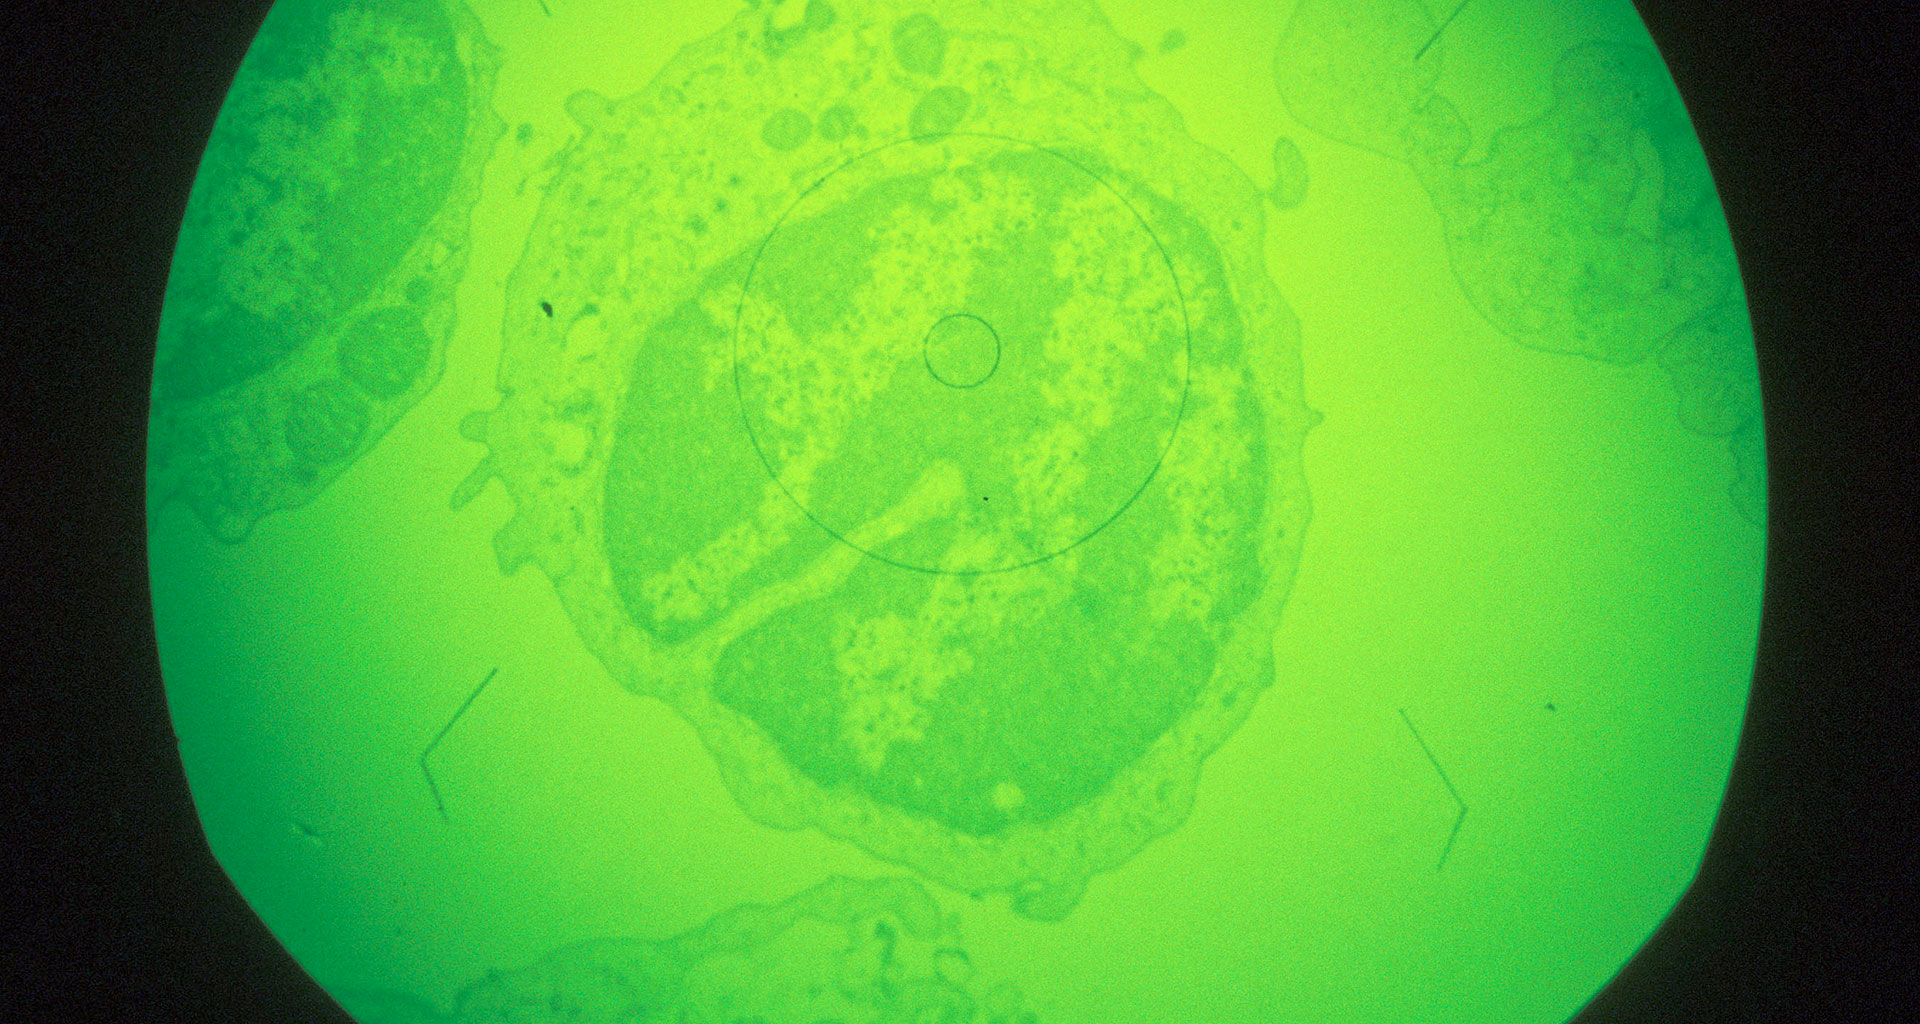 Macrophage cell in early stages of infection with African swine fever virus, magnified about 1,000x. 